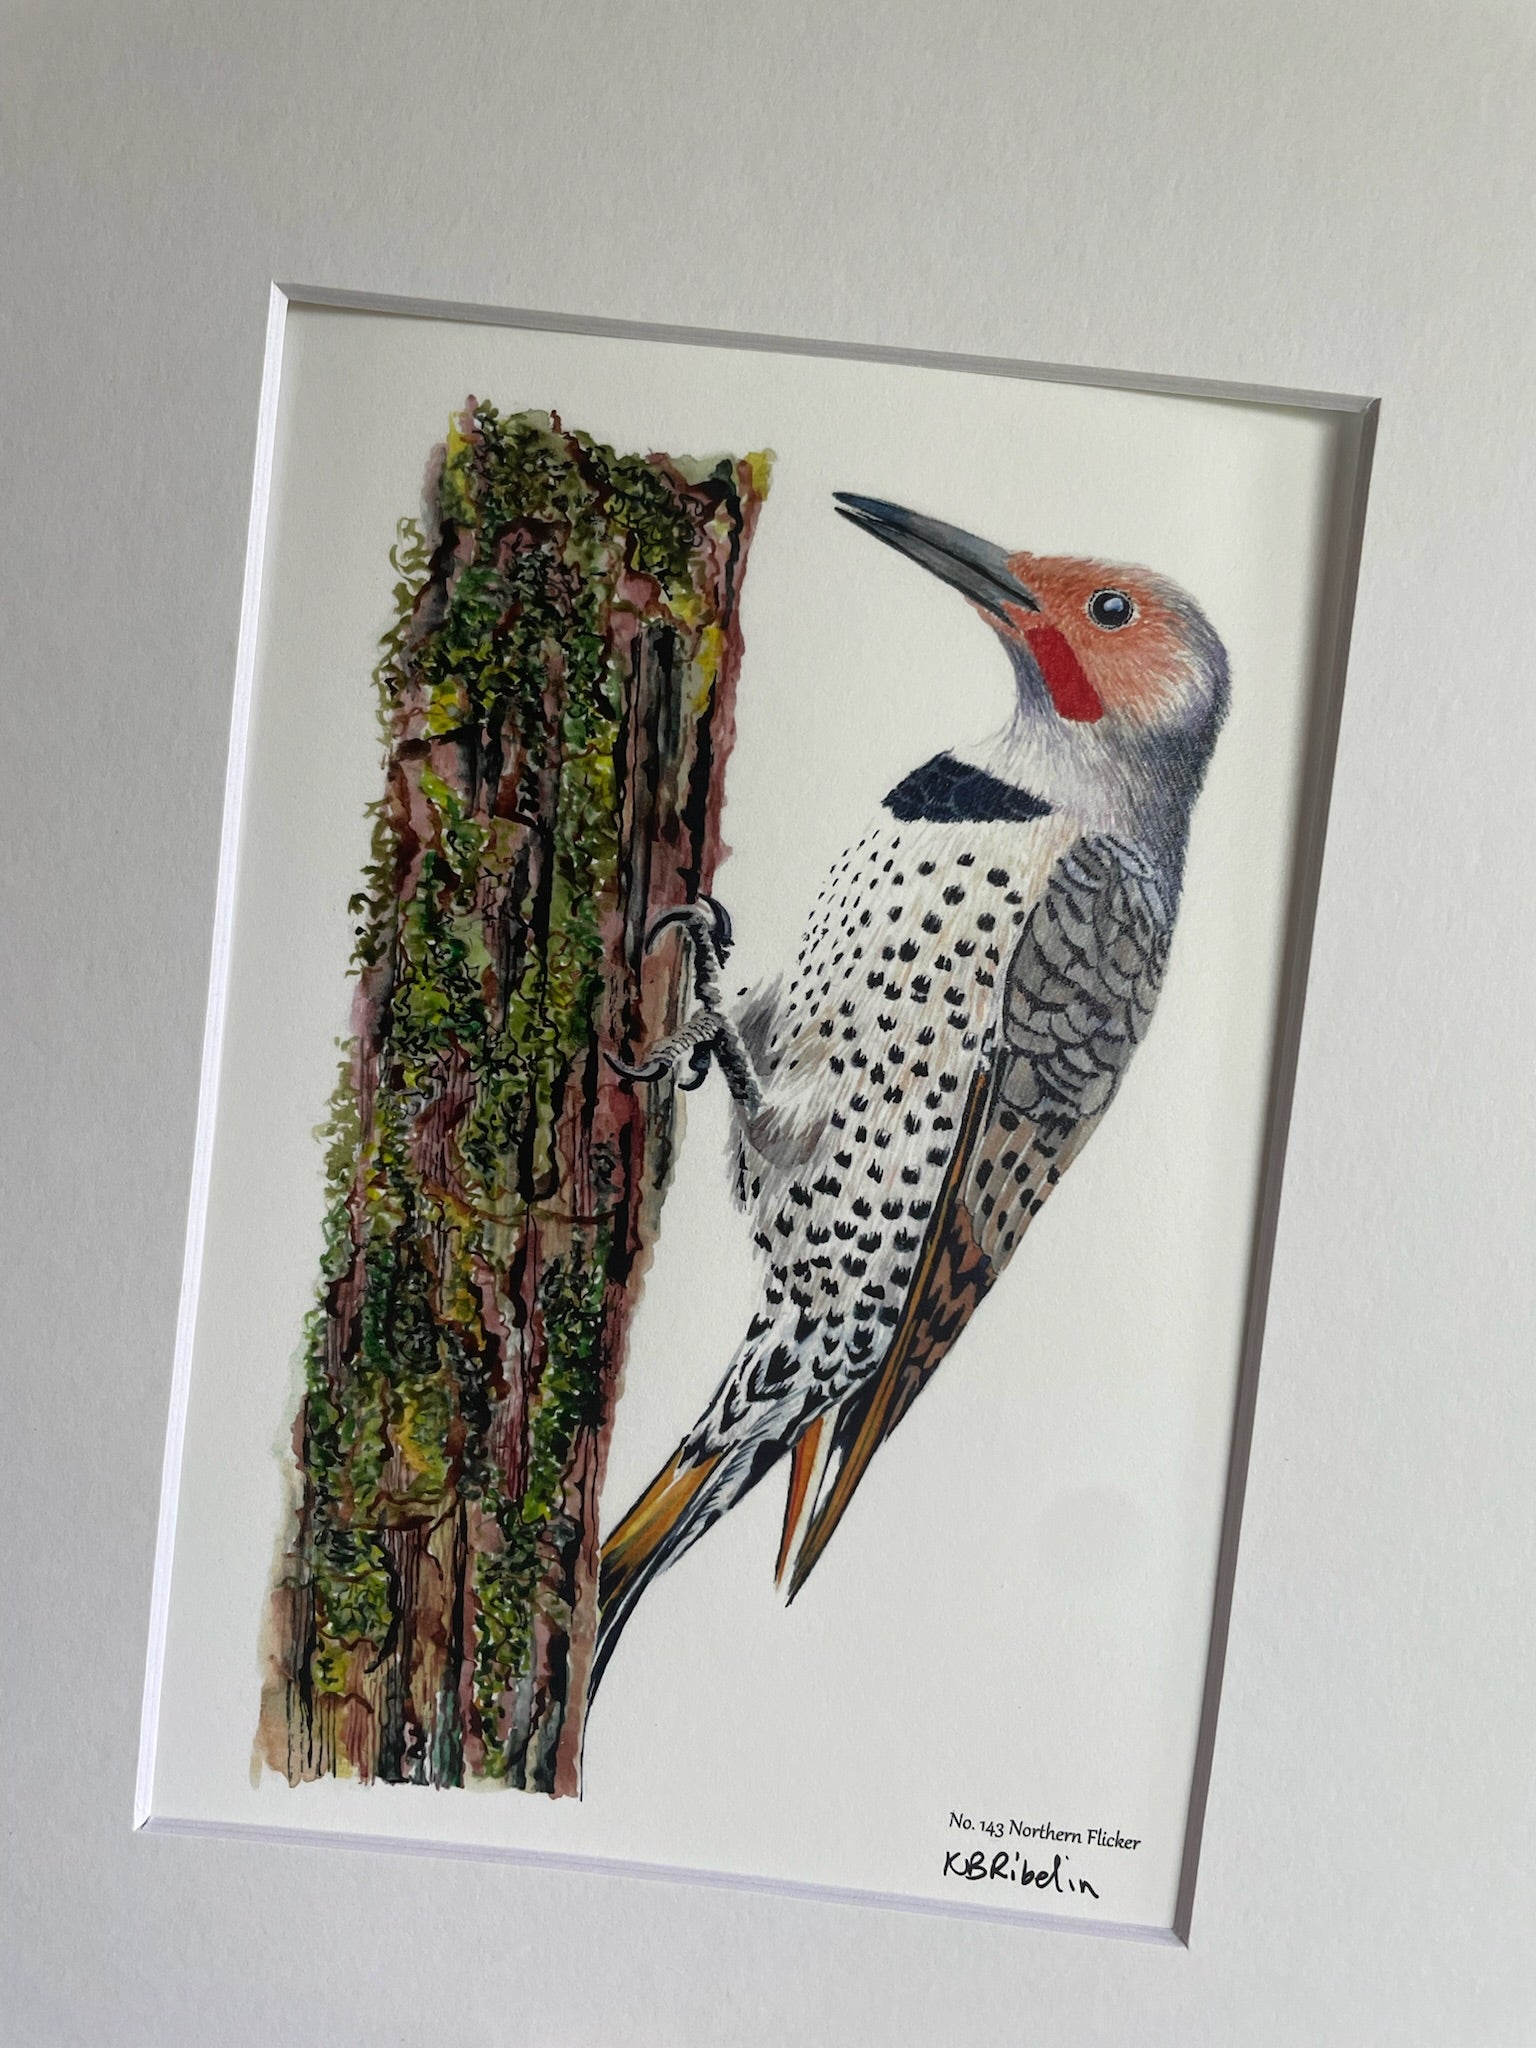 Northern Flicker - Bird Art by KB - Giclee Print with White Mat